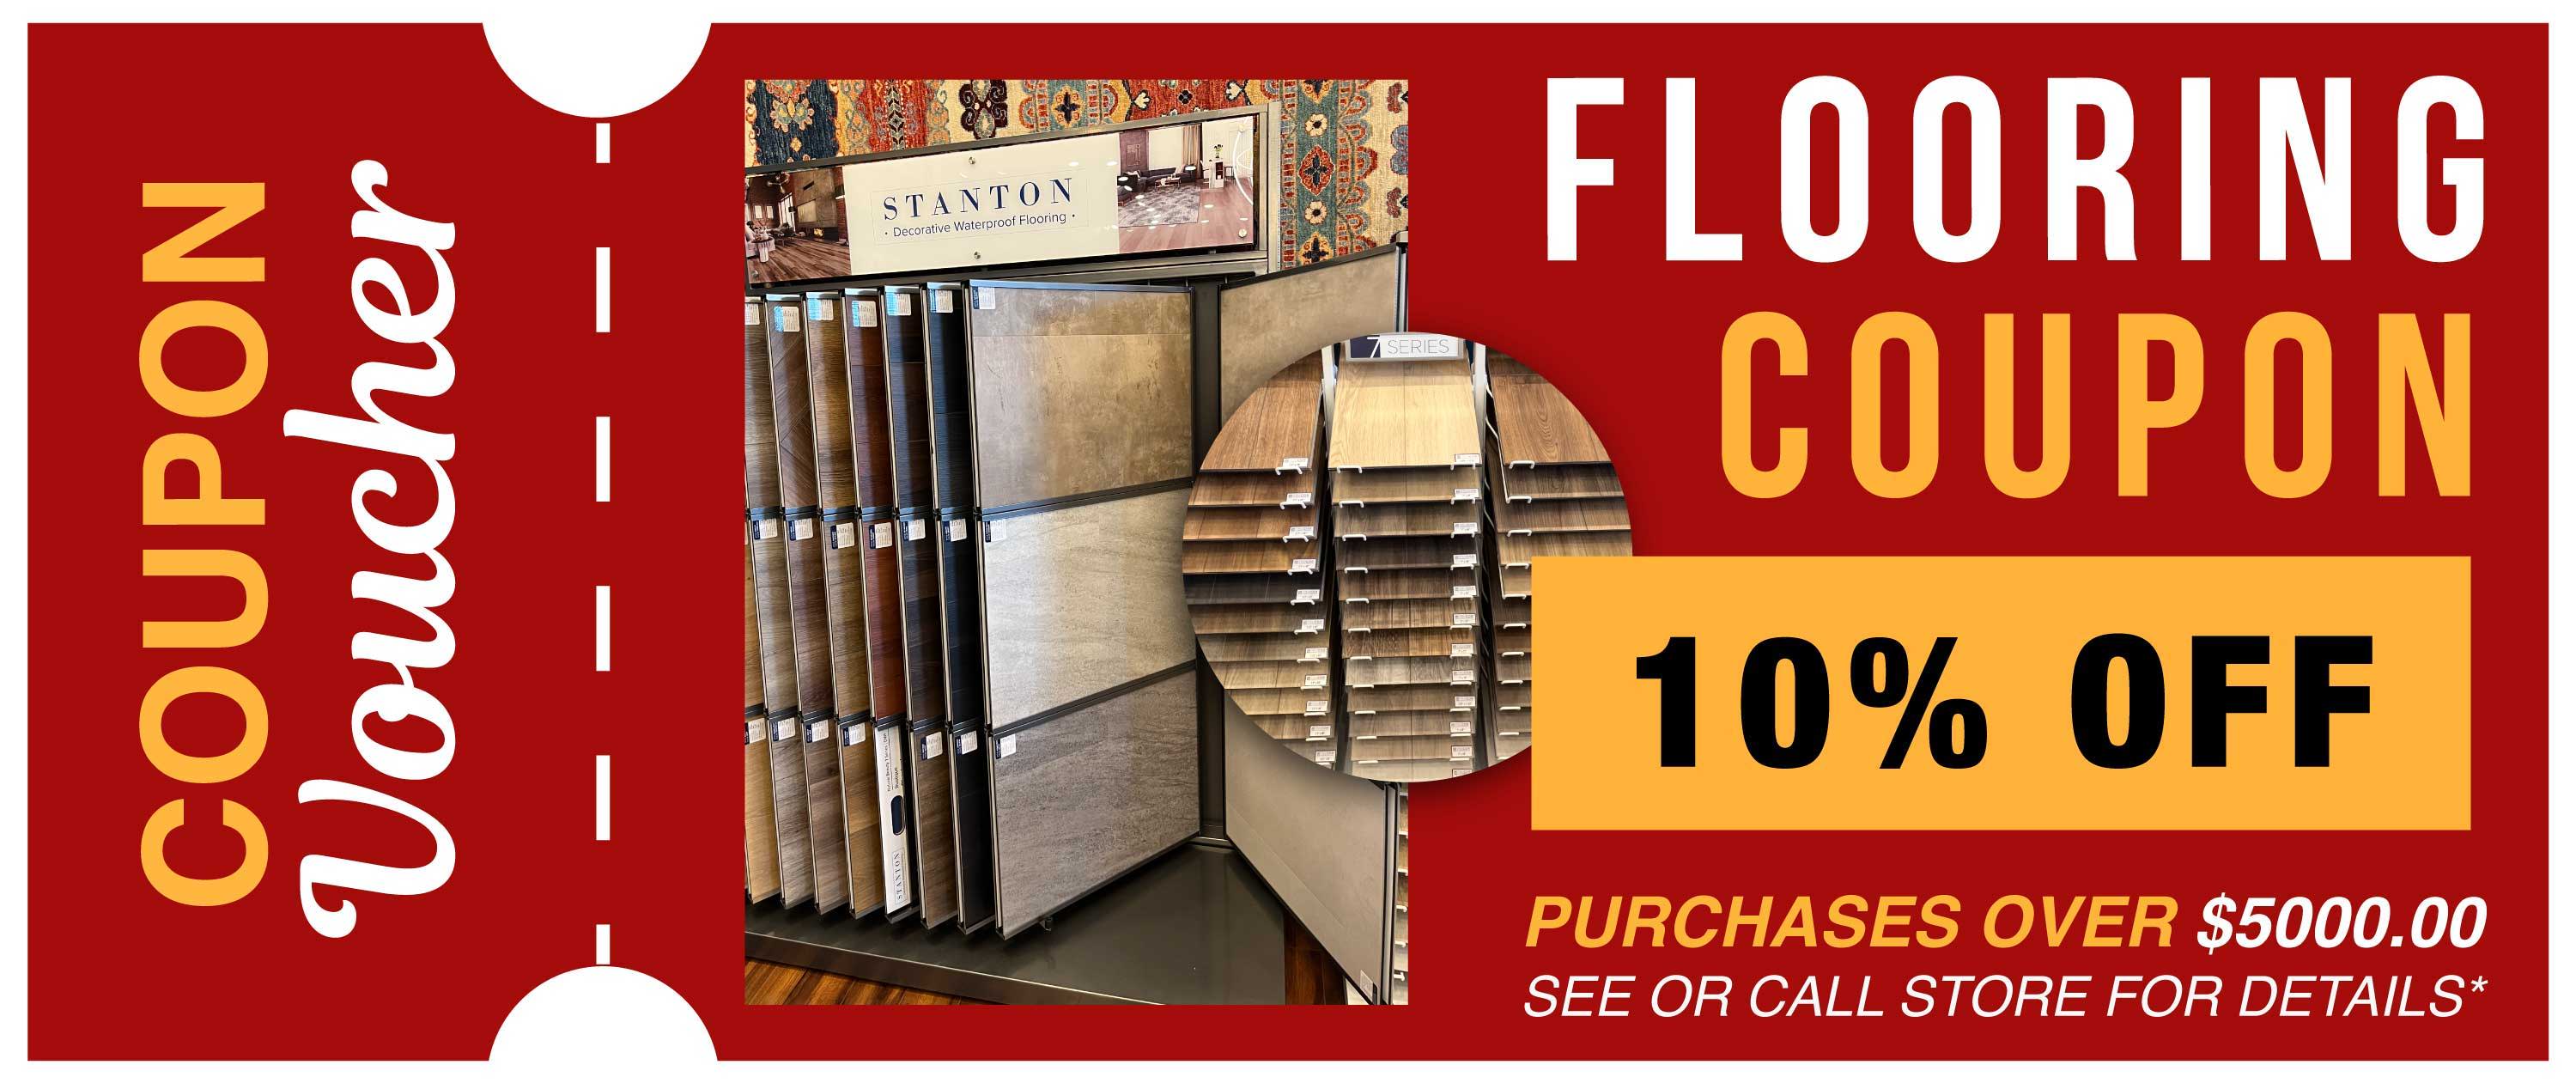 10% off flooring coupon from Kaoud Rugs and Carpet